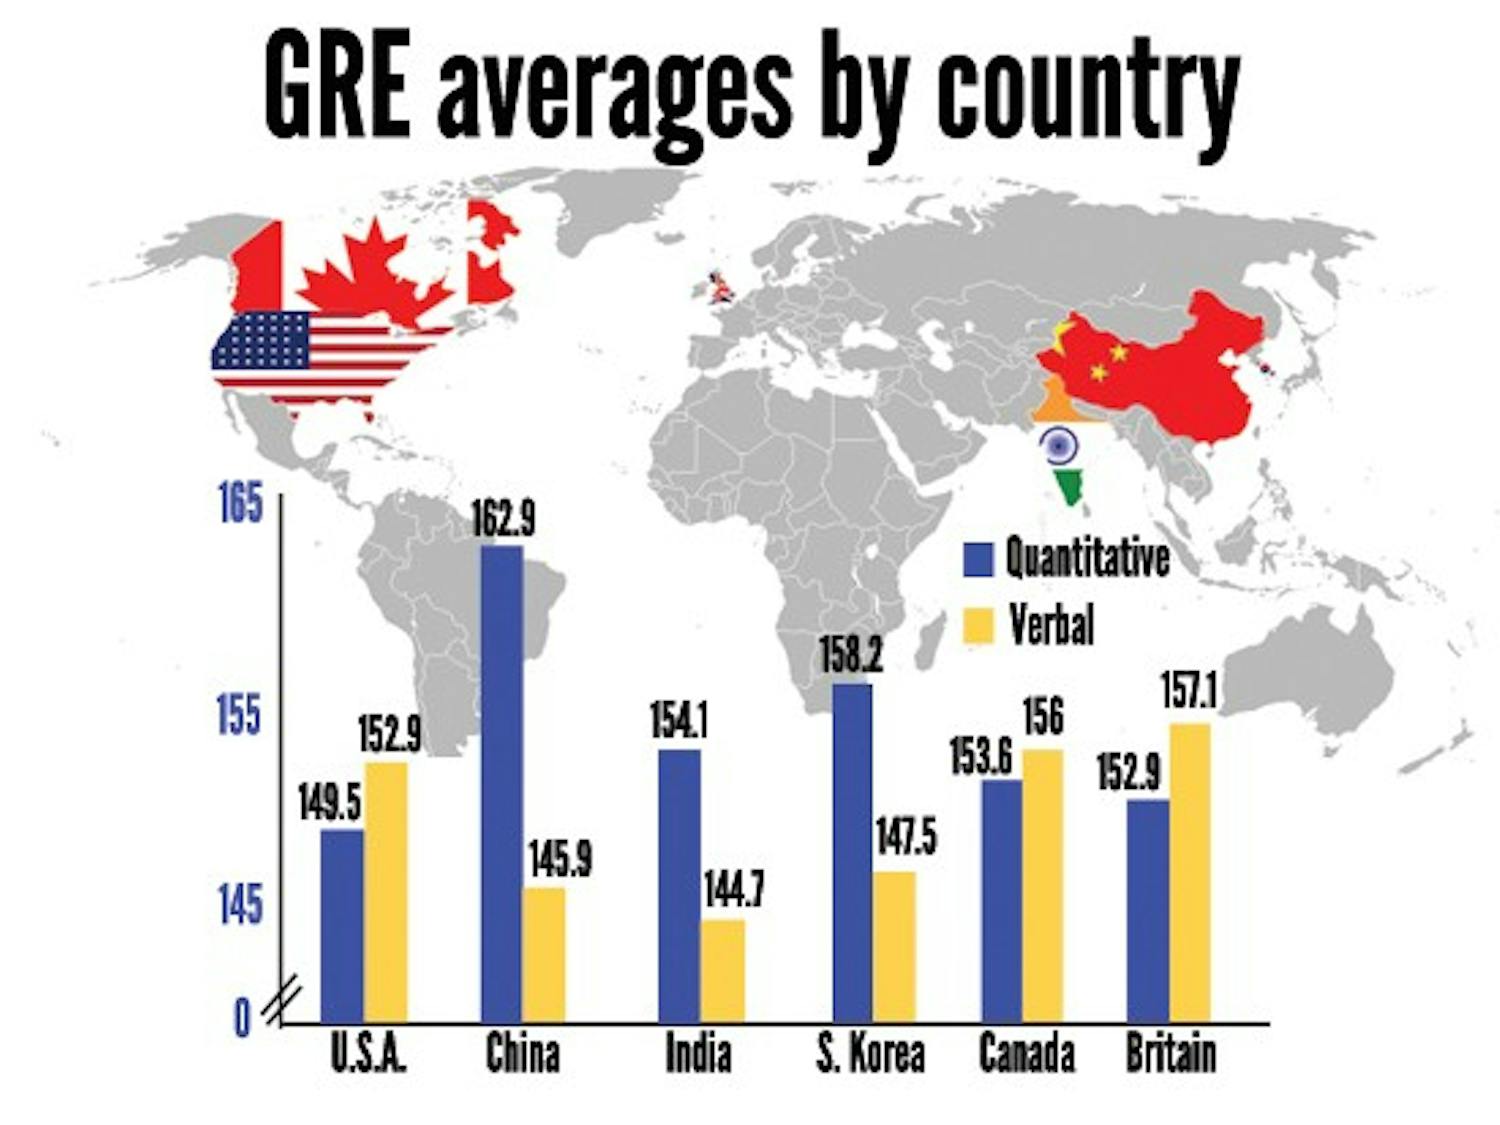 Although the United States falls behind other countries in some GRE categories, Duke graduate school admissions officers say the scores do not have much impact.